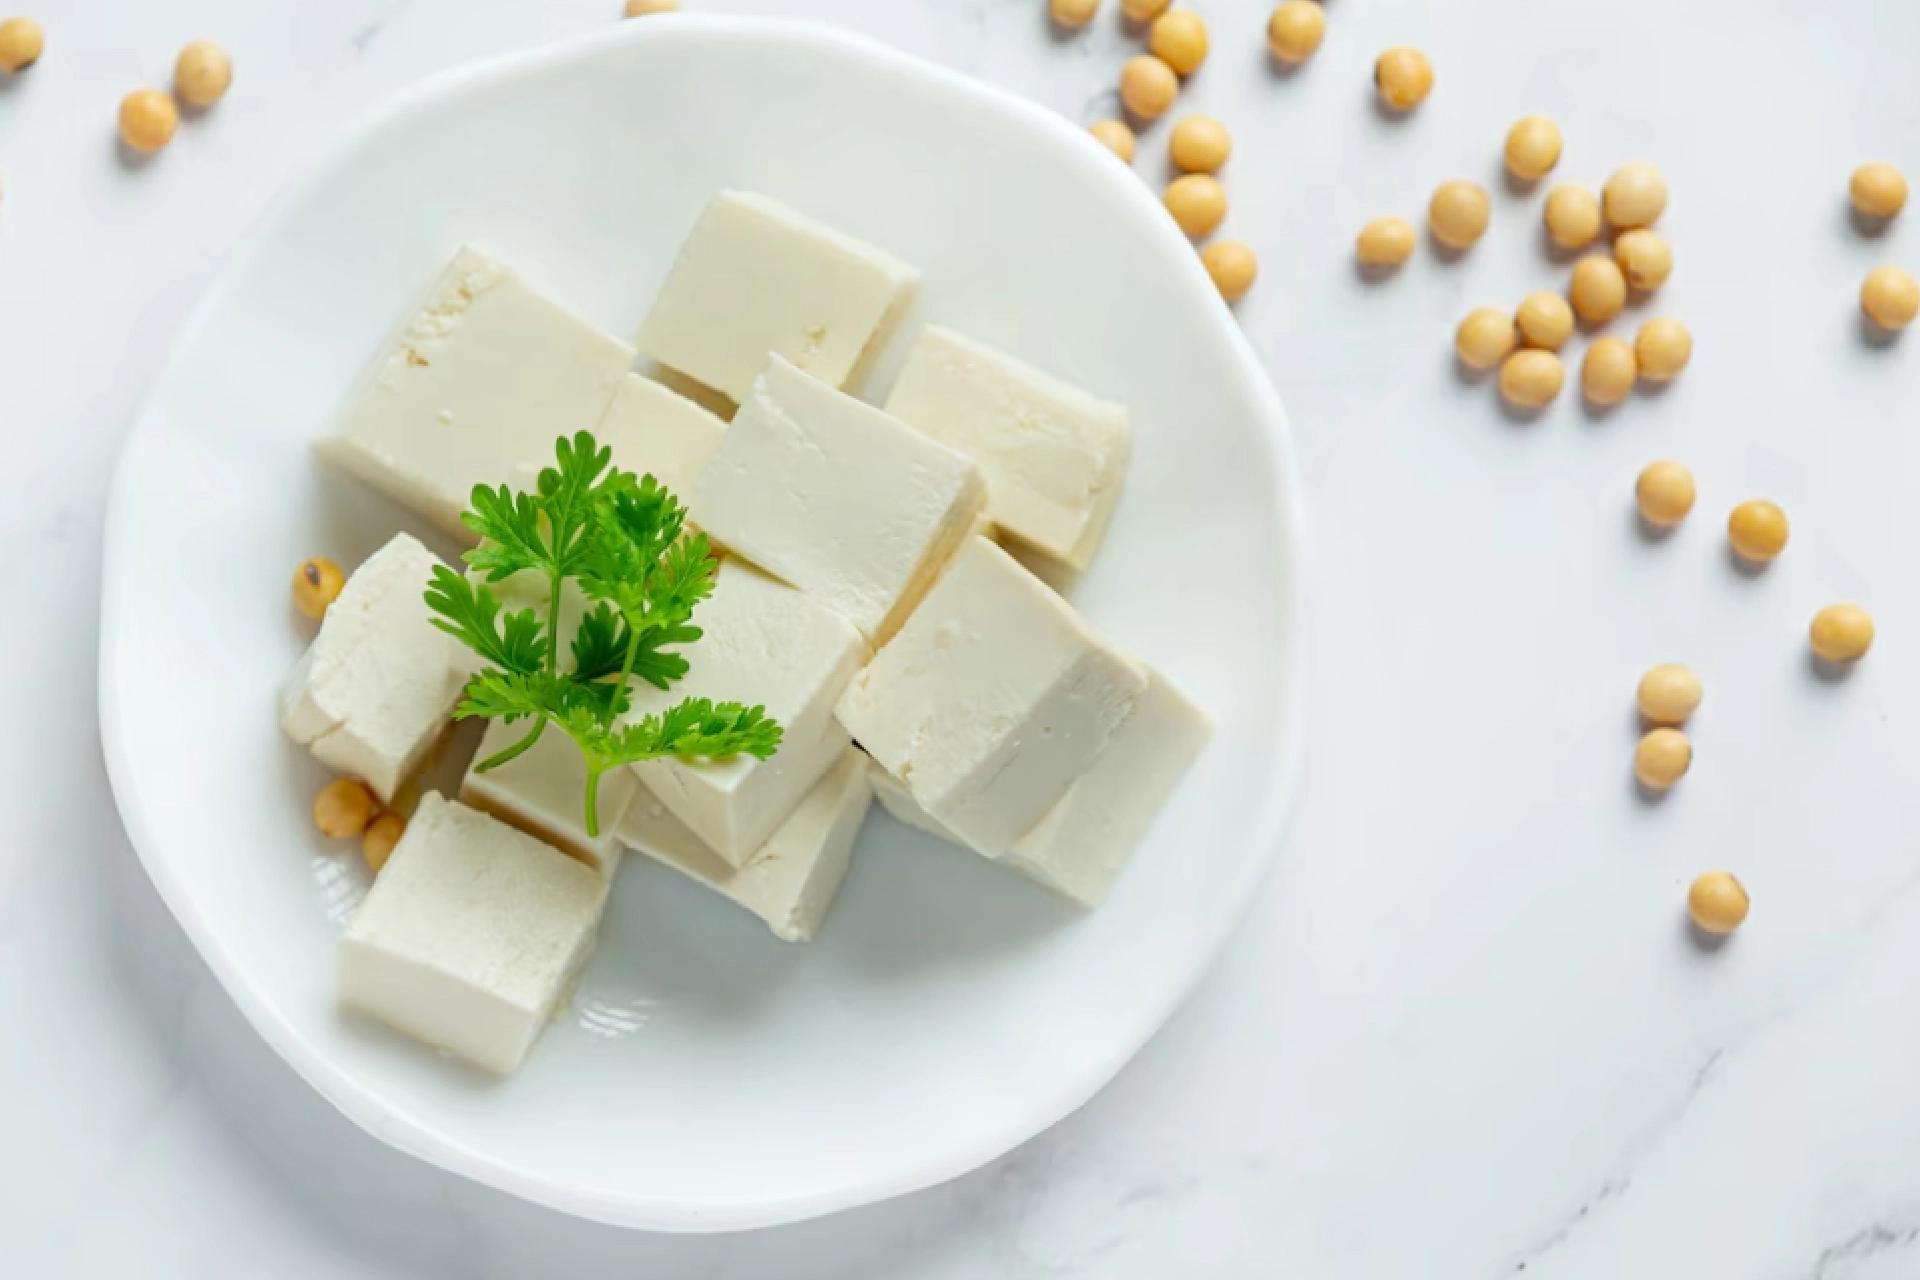 Tofu: Nutritional Value, Benefits and Side Effects